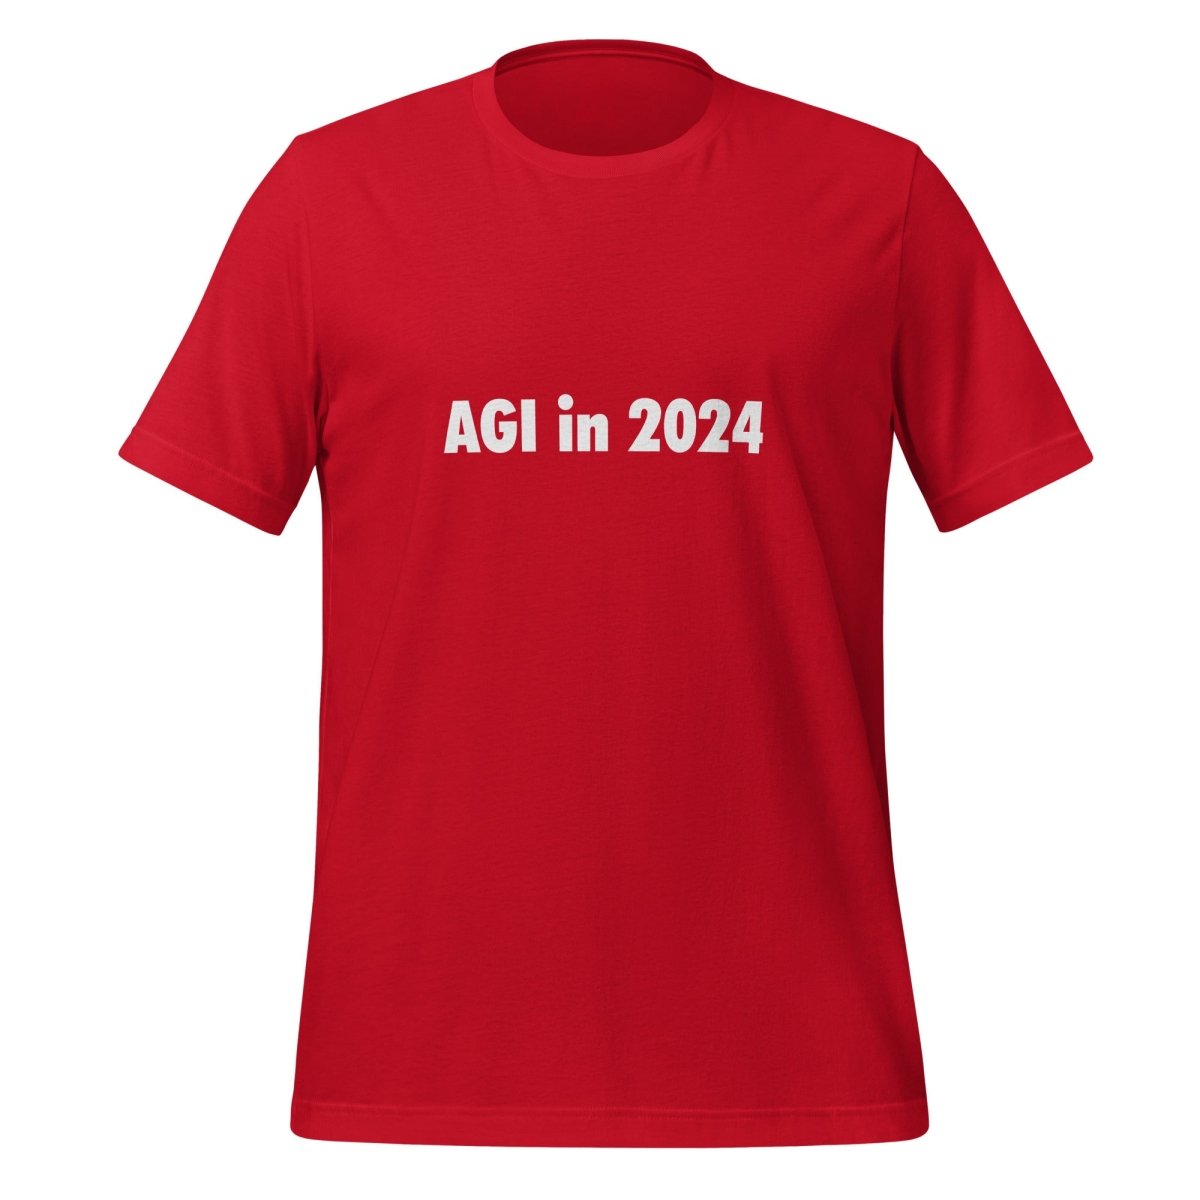 AGI in 2024 T - Shirt (unisex) - Red - AI Store